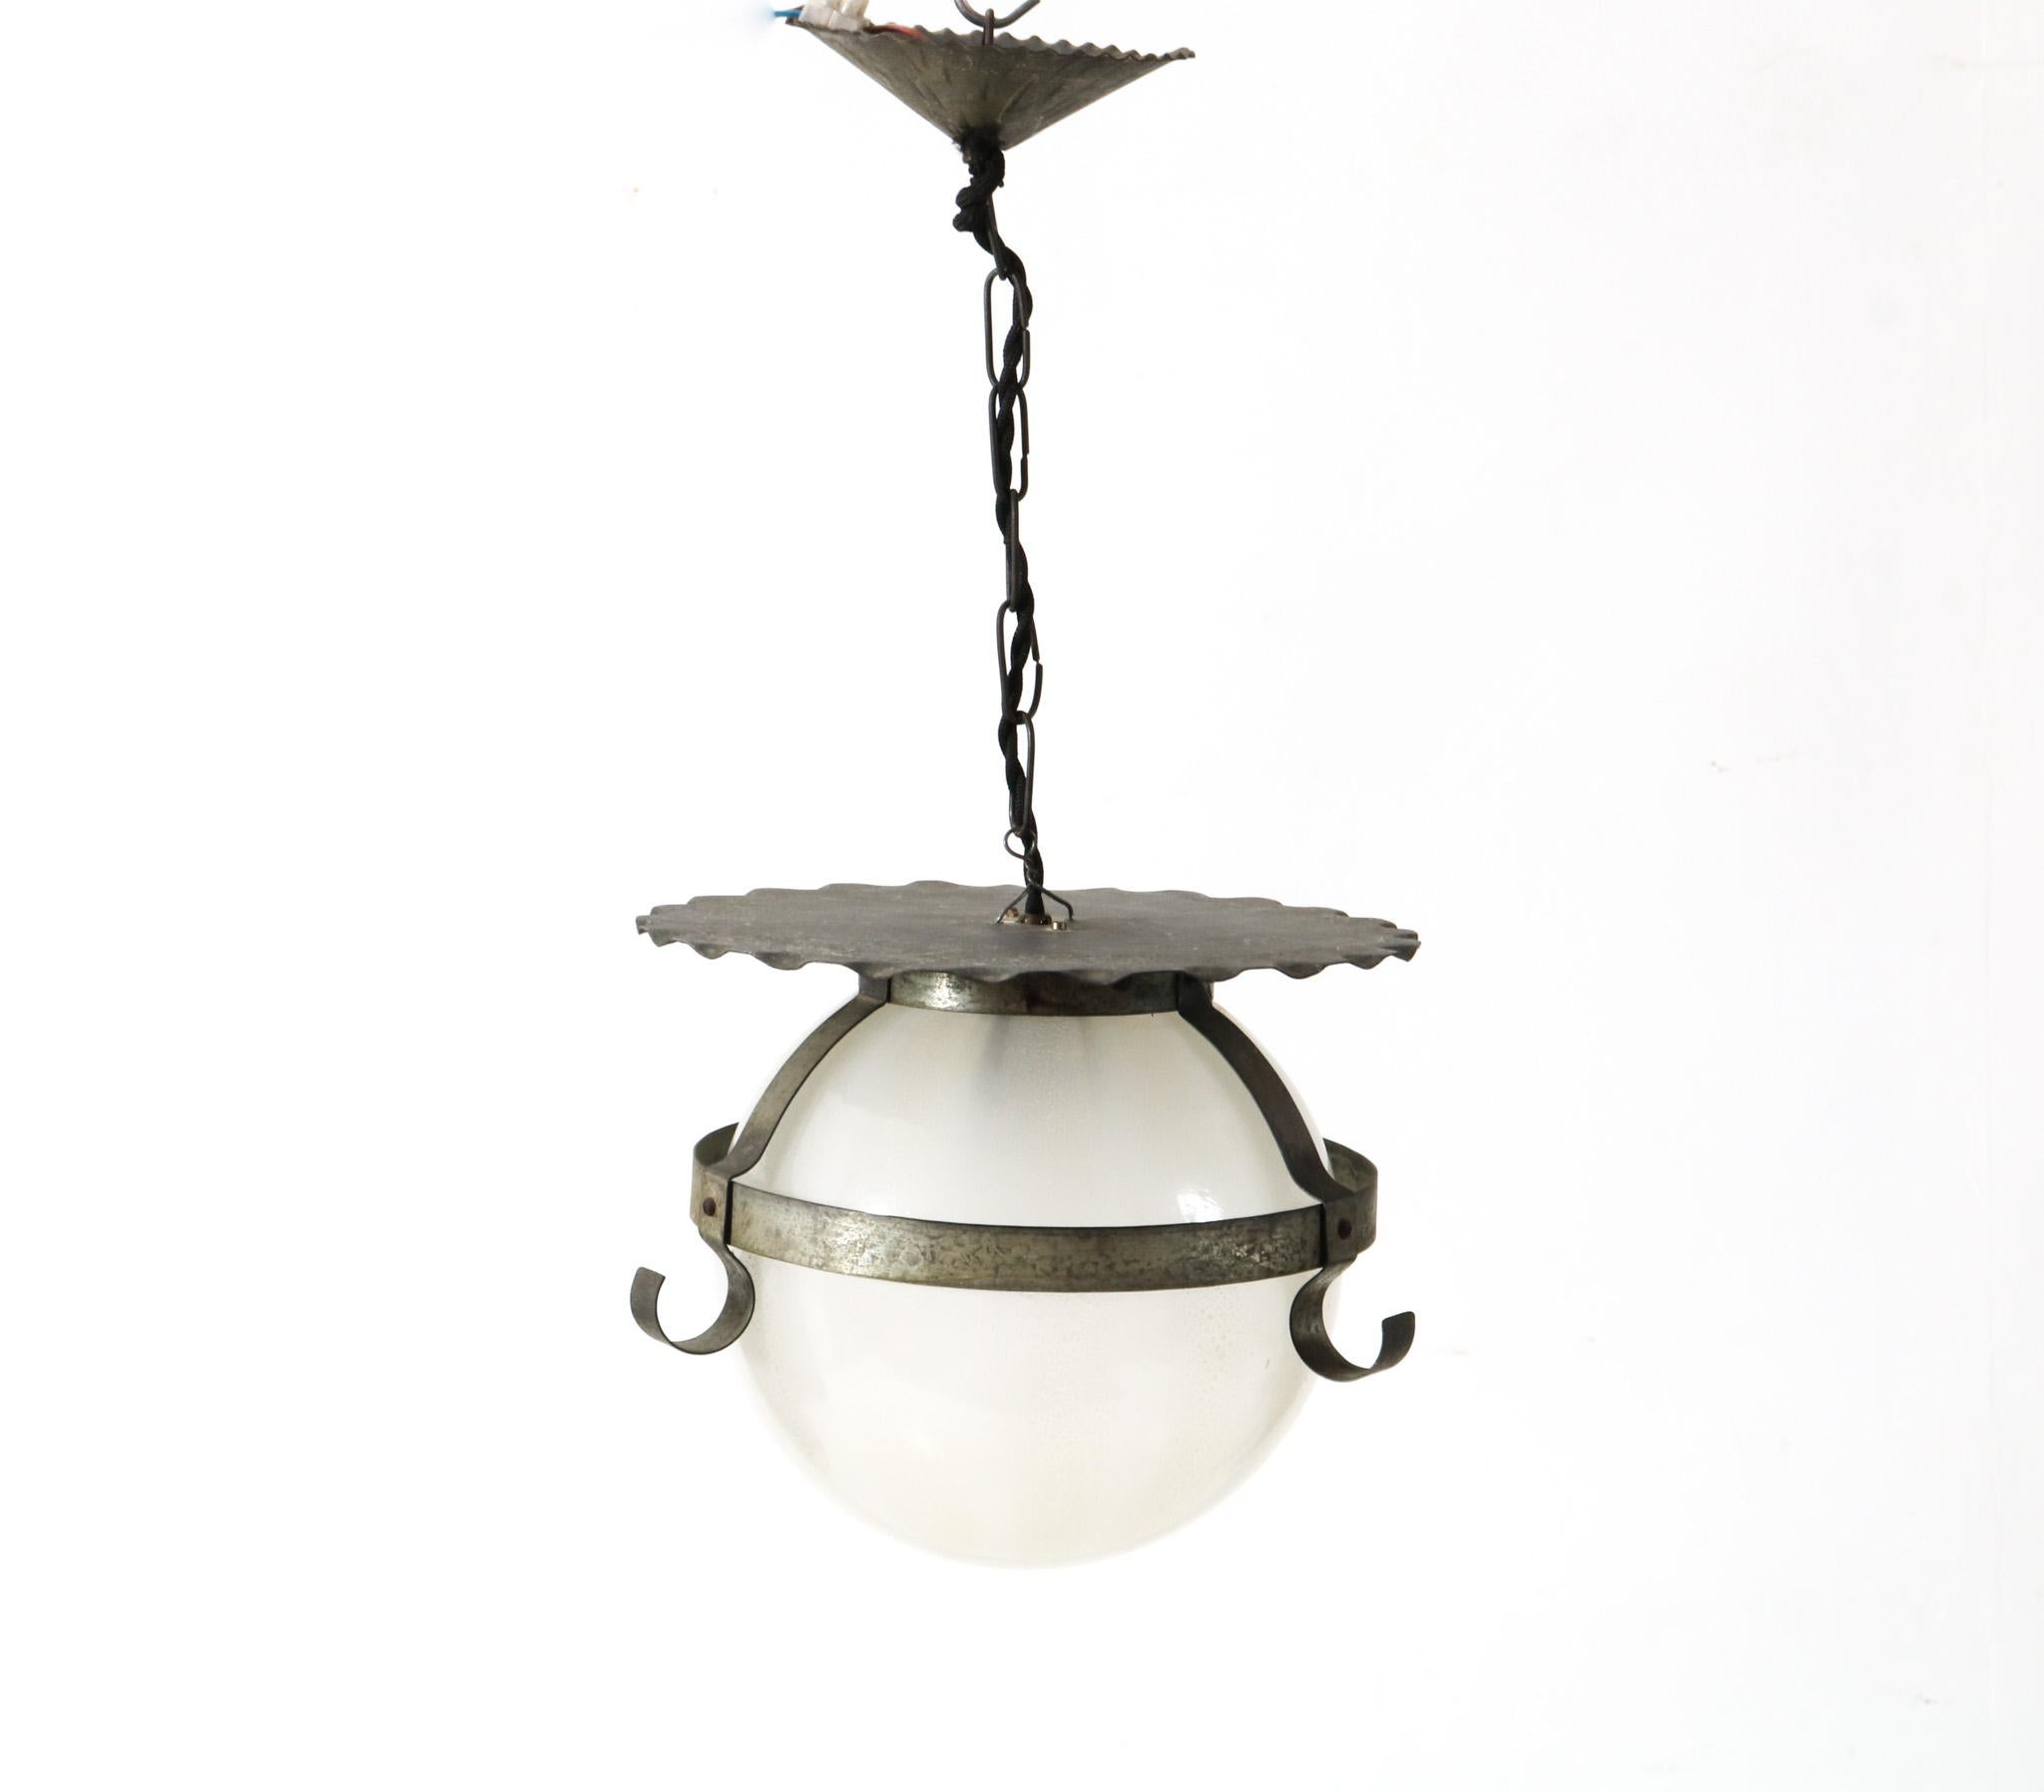 Stunning Art Deco Amsterdamse School pendant lamp.
The original glass spherical is designed by A.D. Copier and the original wrought iron frame is designed by Frits Lensvelt for Glasfabriek Leerdam.
Striking Dutch design from the 1930s.
This